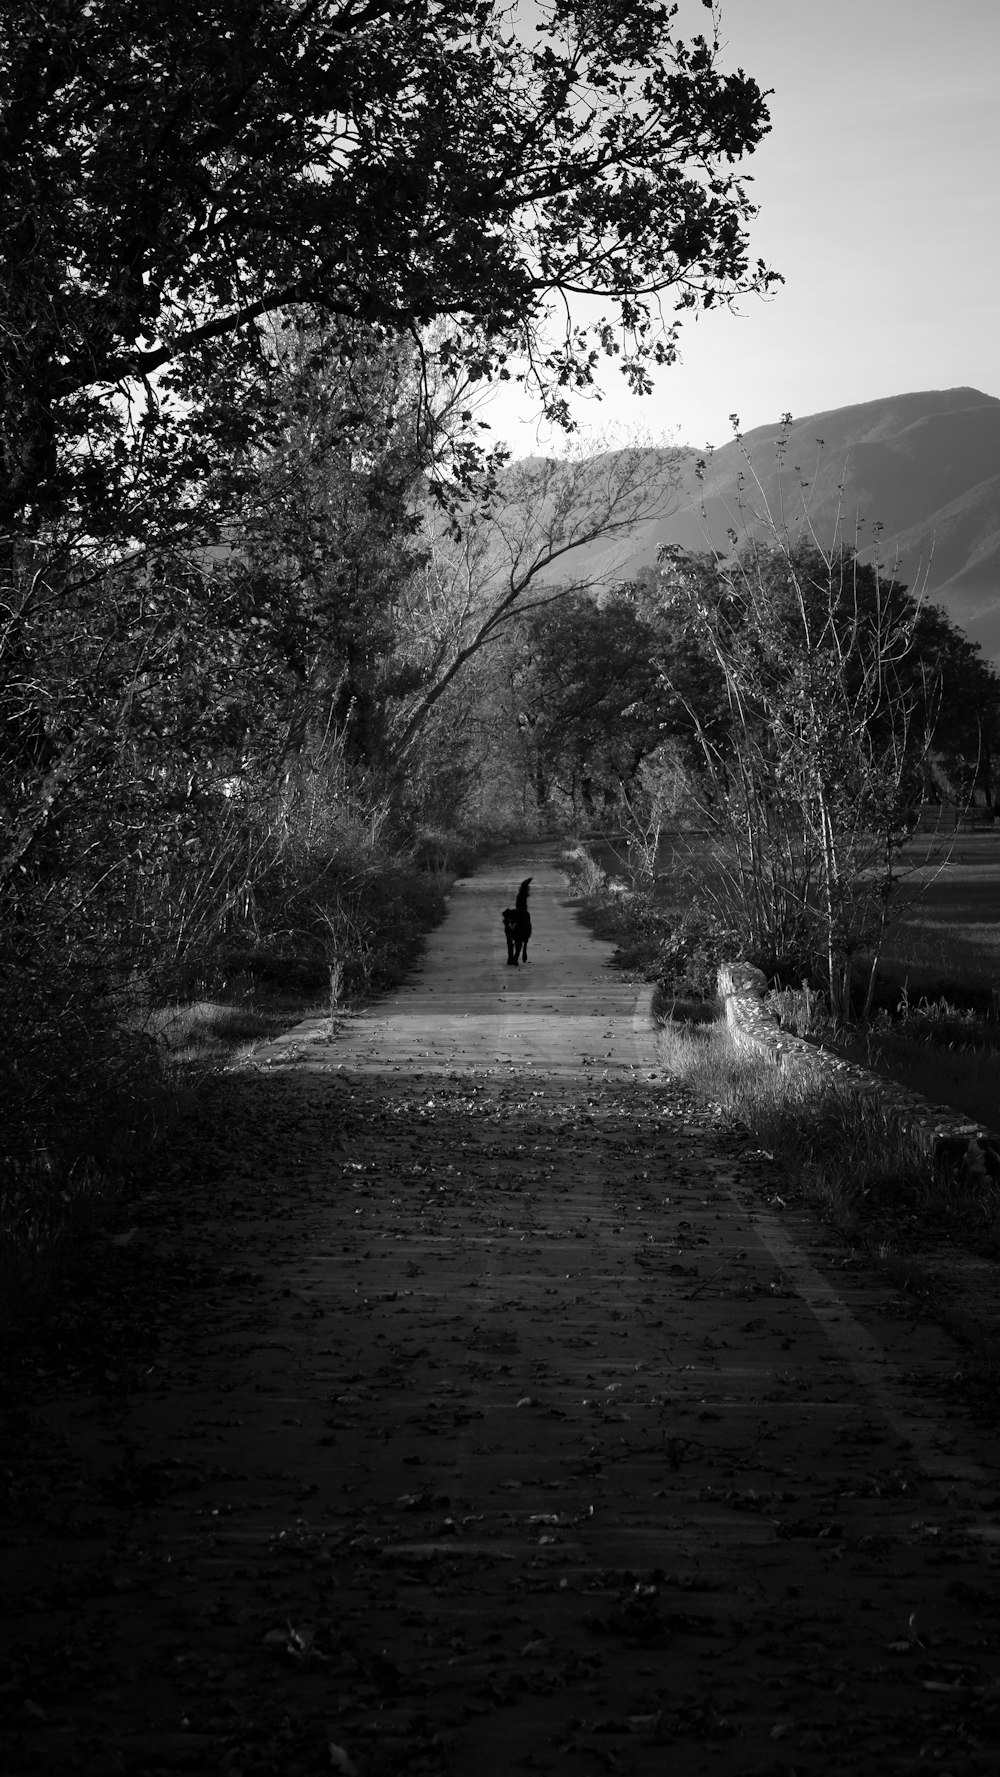 a black and white photo of a person walking down a dirt road